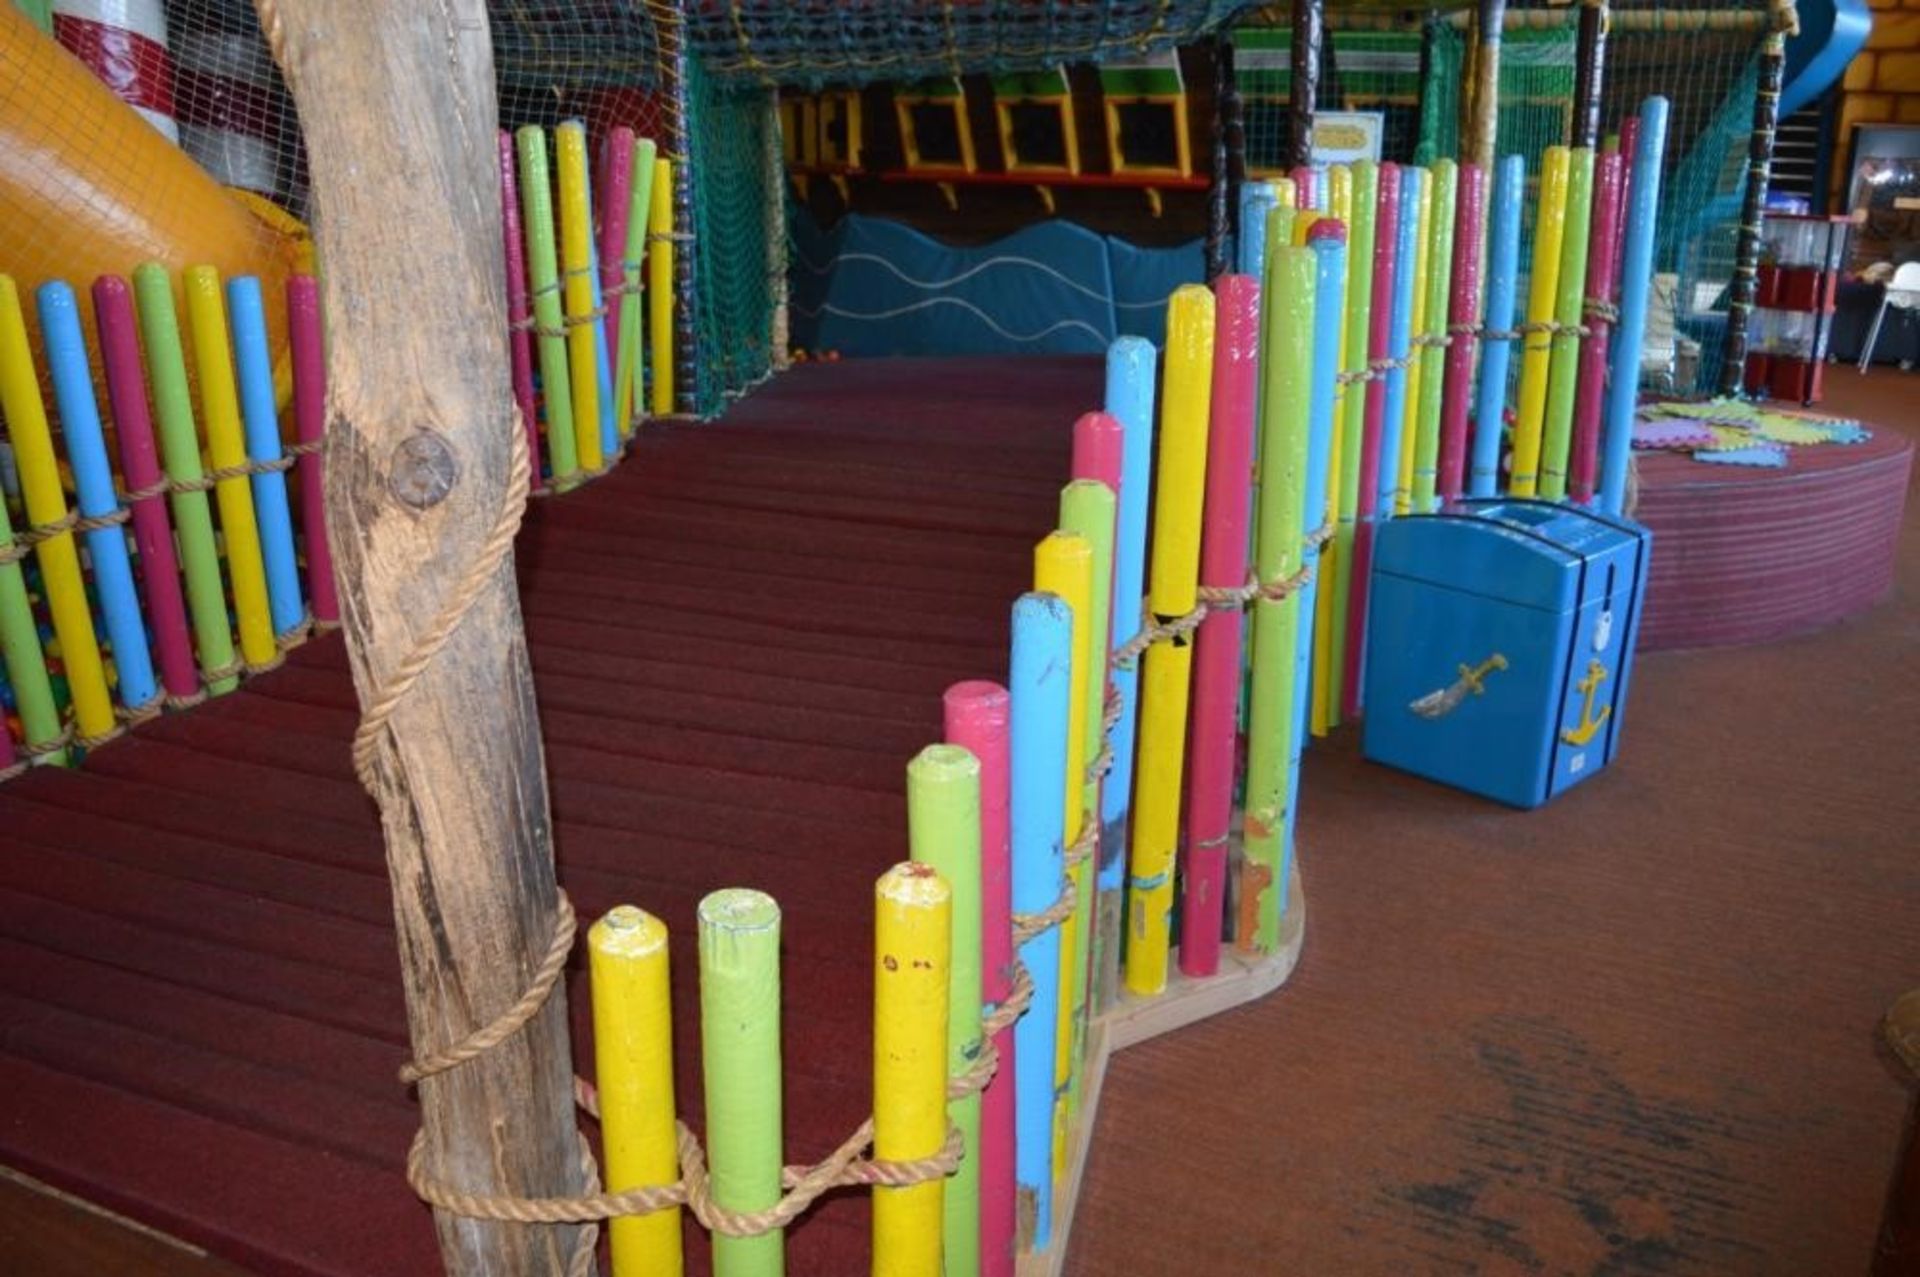 Botany Bay Puddletown Pirates Play Centre - The Only Pirate Themed Play Centre in the North West - F - Image 16 of 30